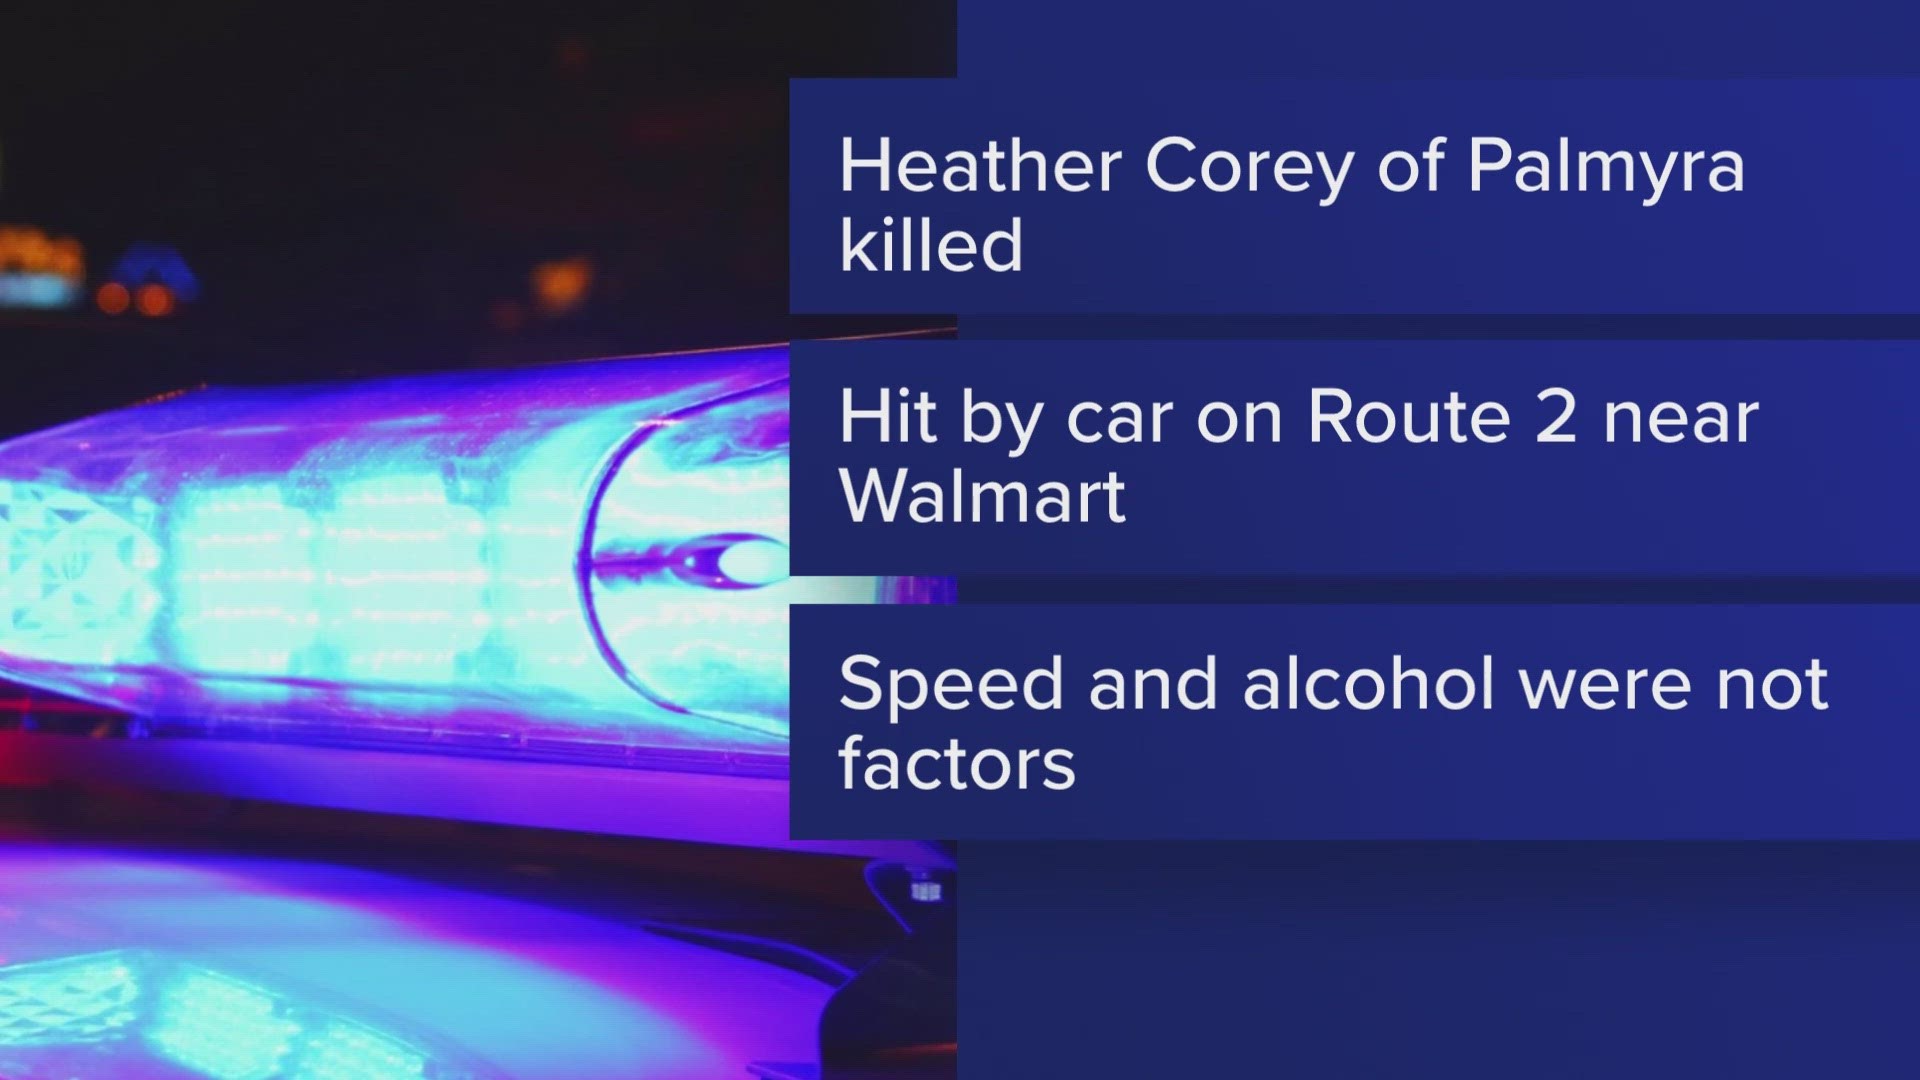 Heather Corey, 45, was crossing Route 2 from the Walmart parking lot toward the Dollar General when she was struck by a 2016 Dodge Grand Caravan.